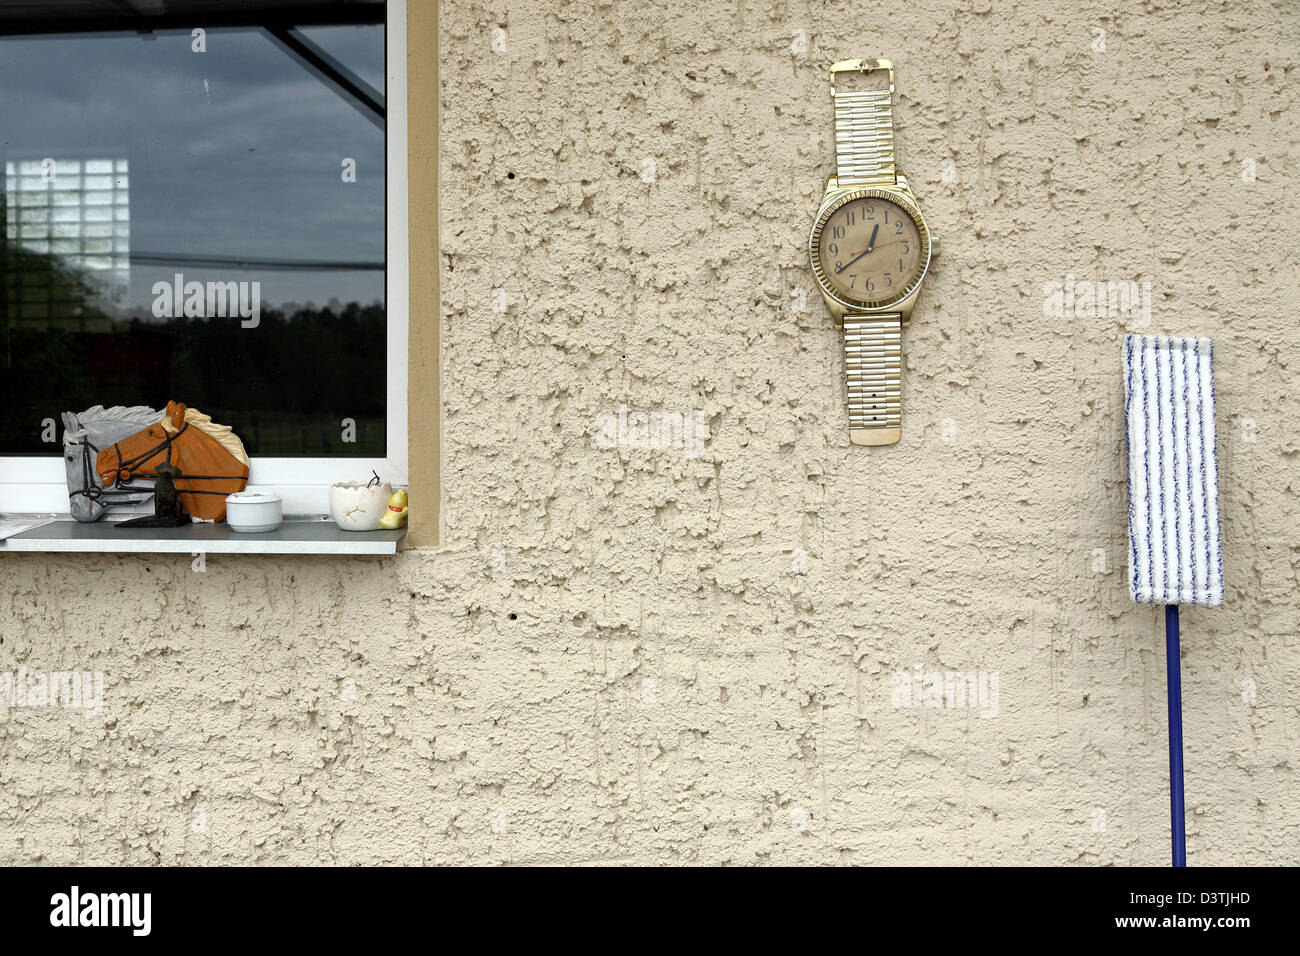 Birkholz, Germany, over a large wristwatch and mop on a house wall Stock Photo